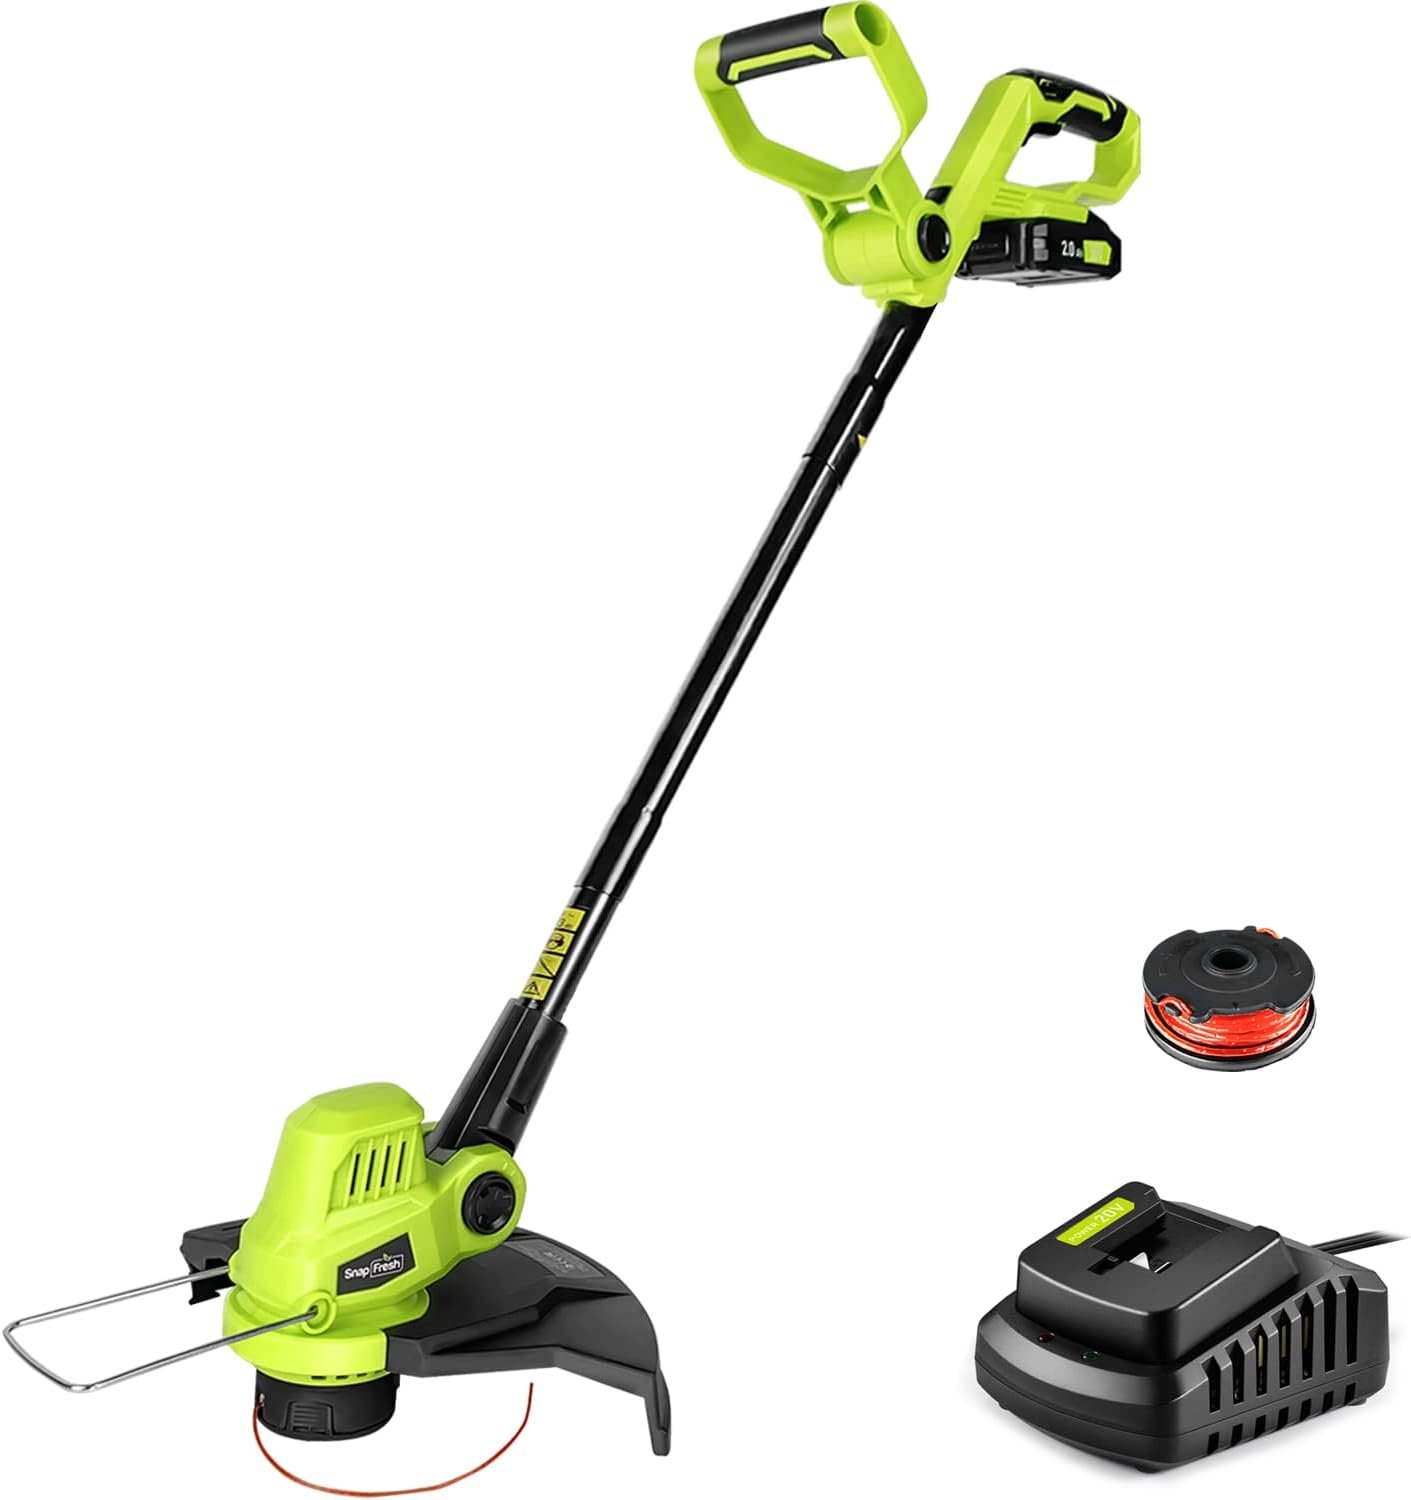 SnapFresh Lawn Trimmer Review